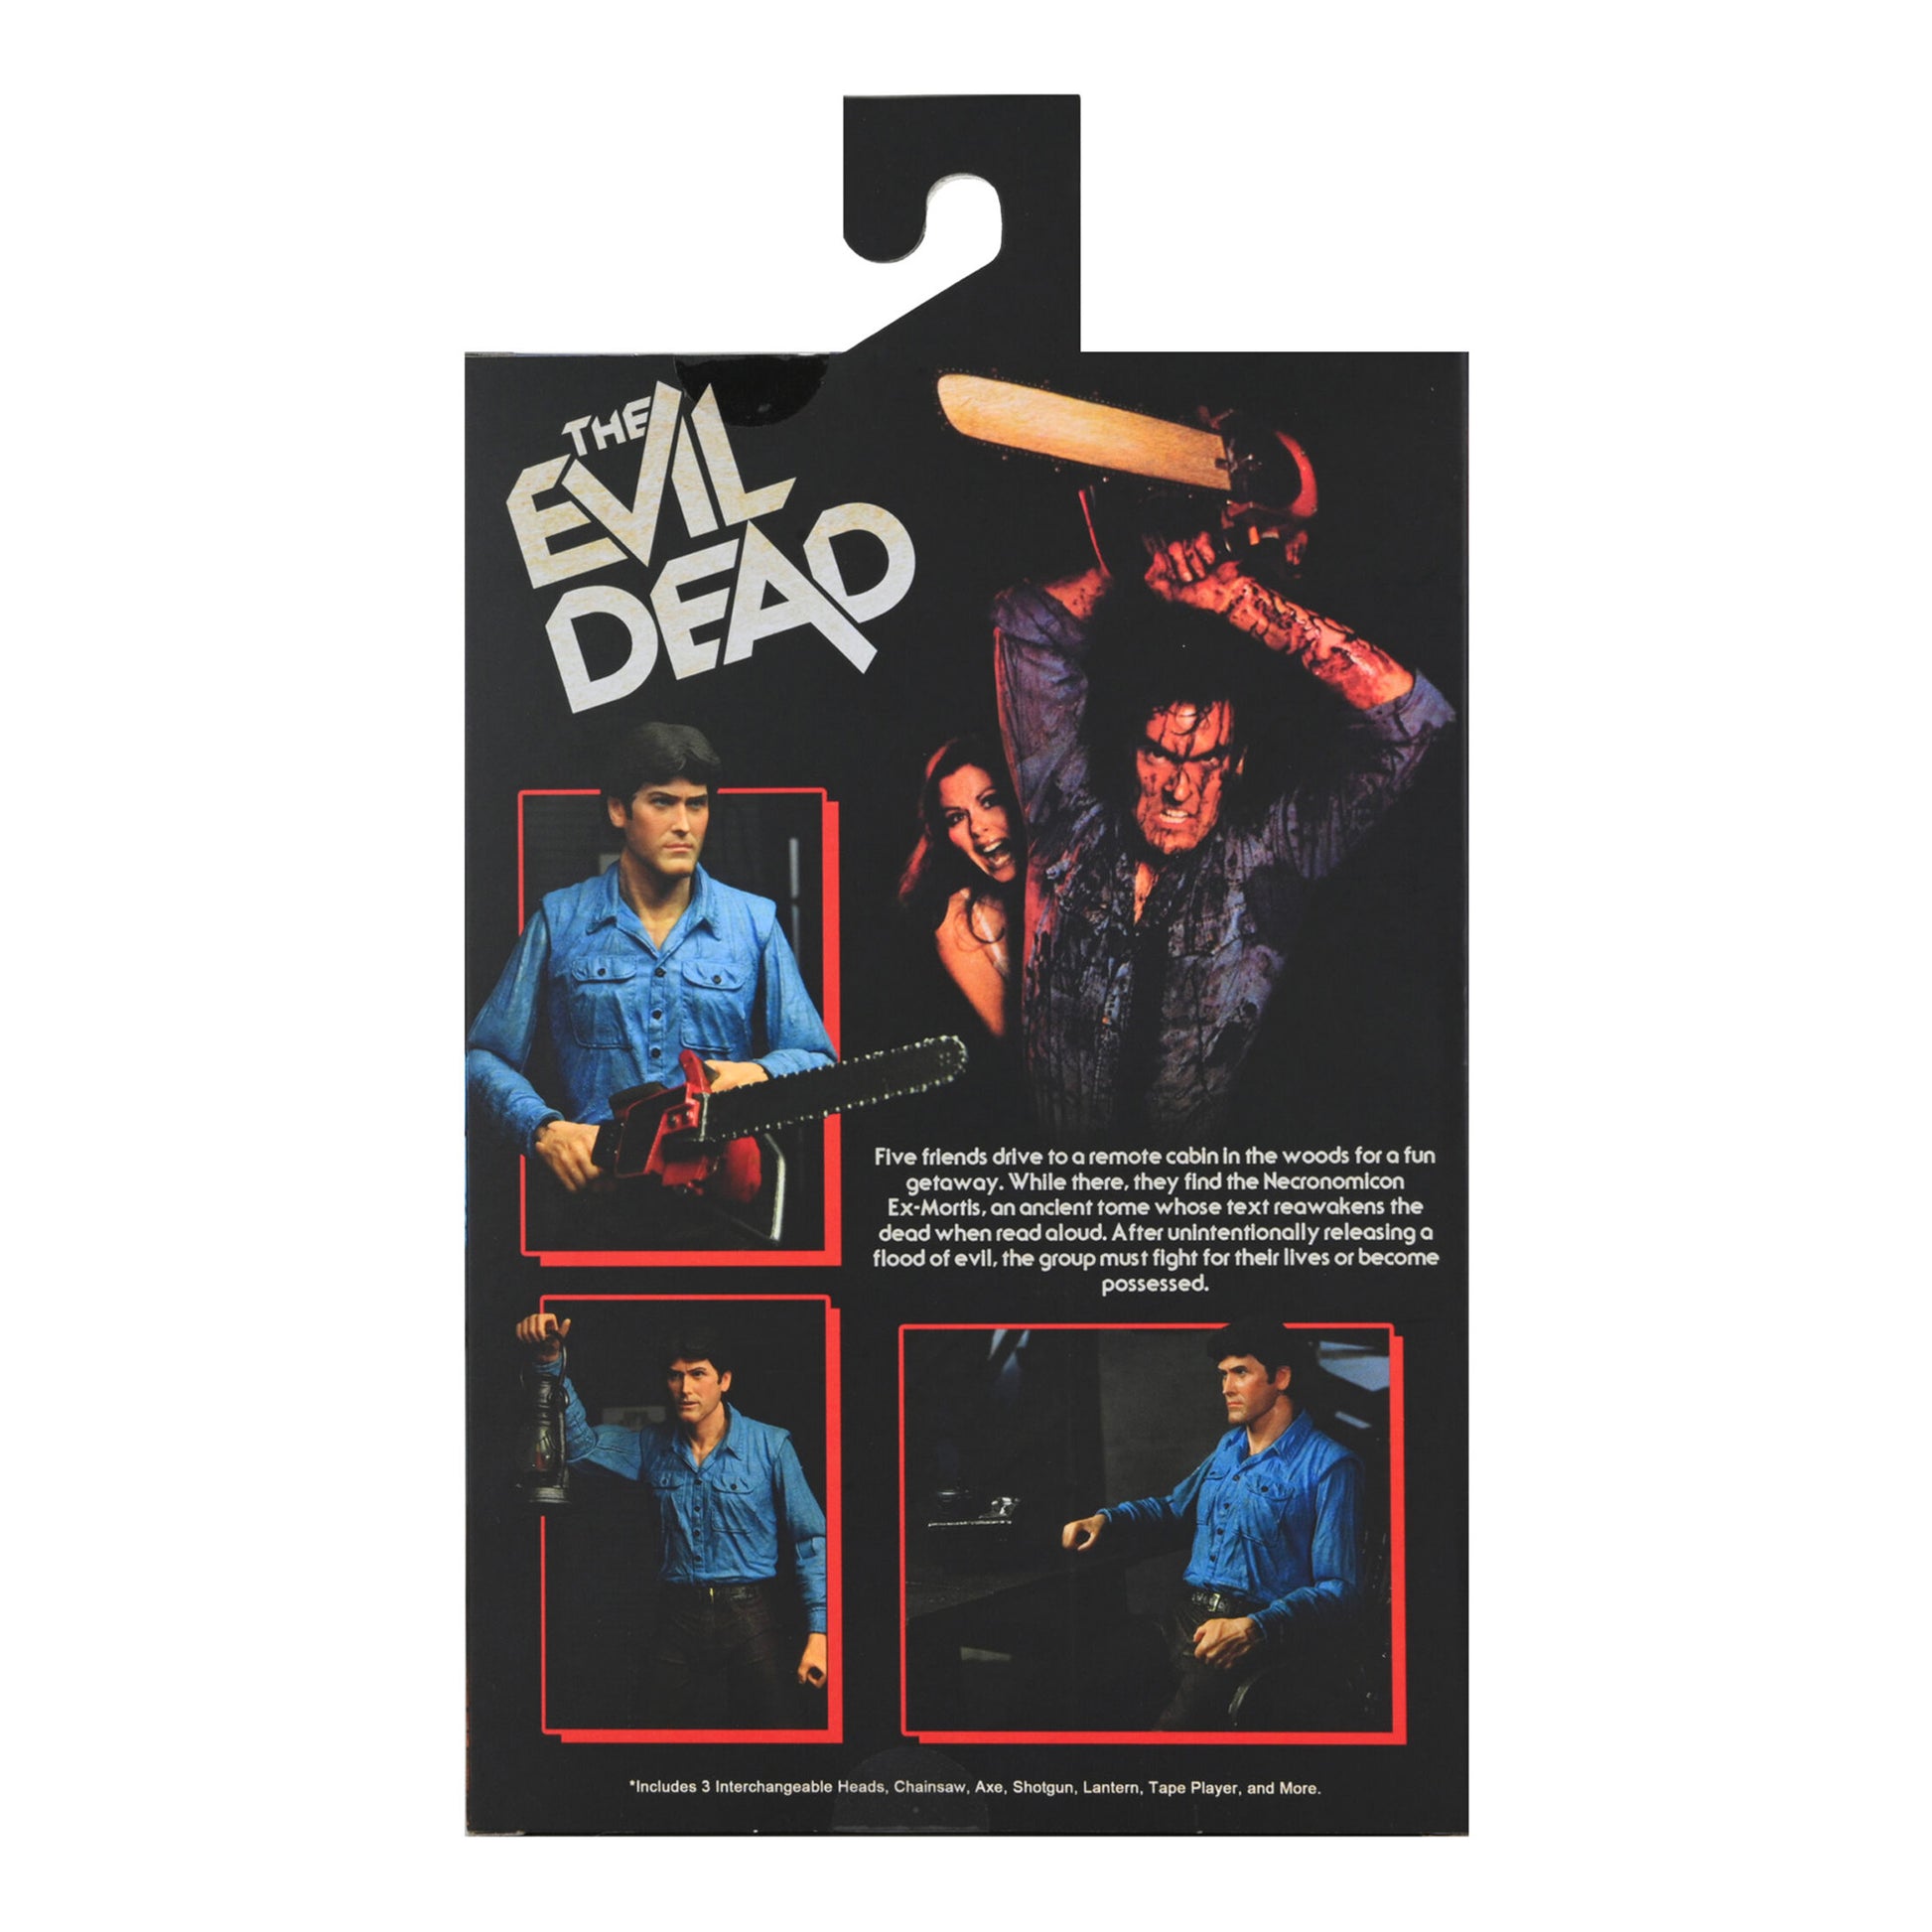  The Evil Dead (Ultimate Edition) : Bruce Campbell